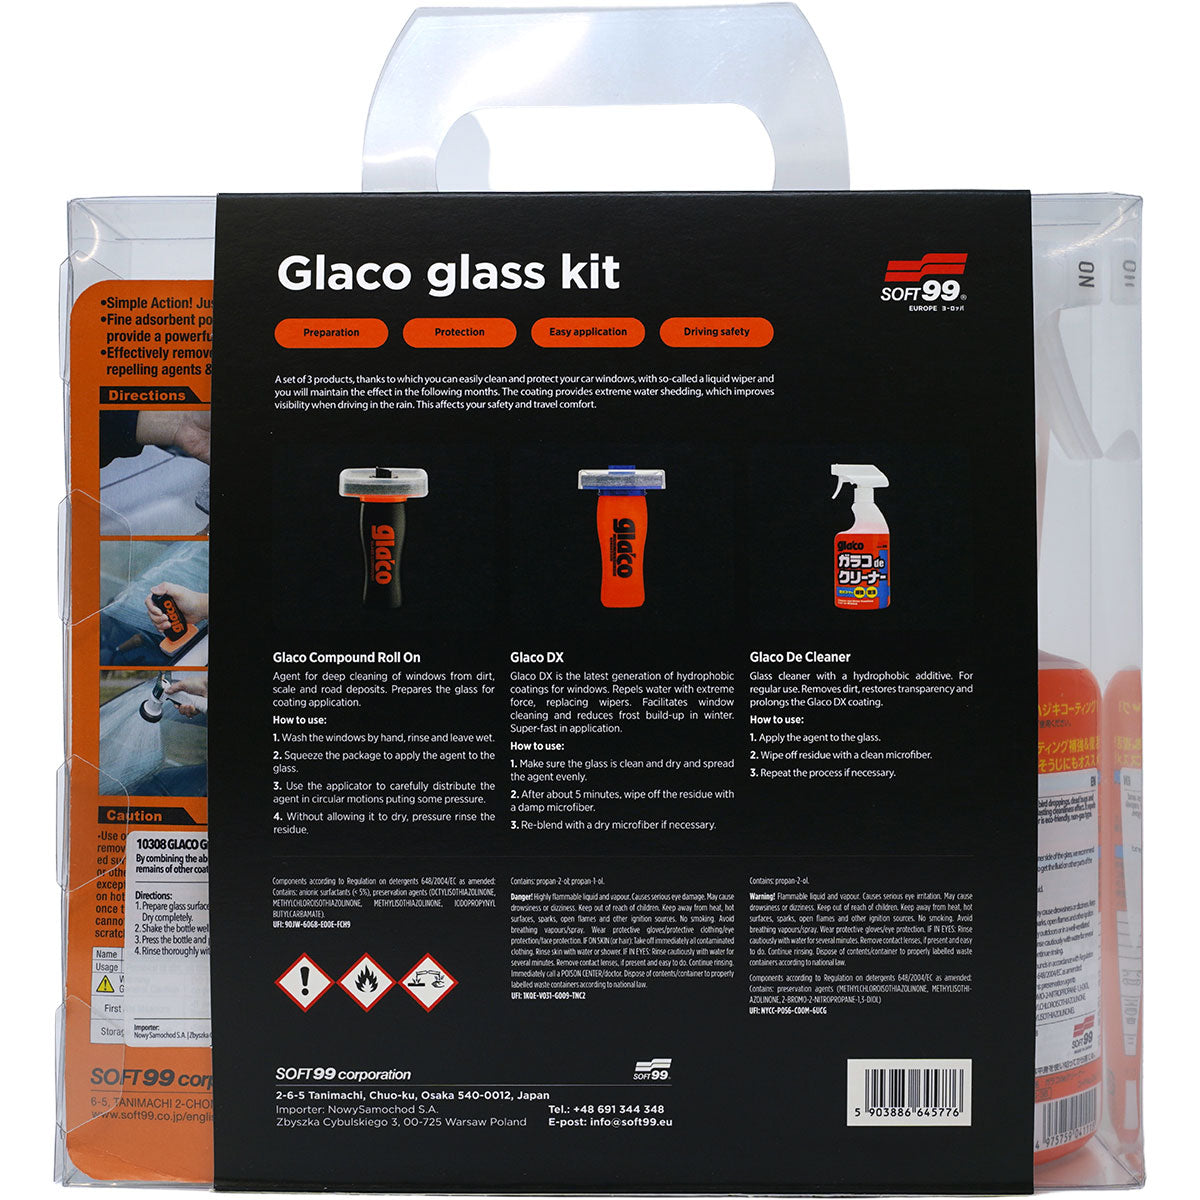 Buy Soft 99 Glaco DX Glass Set from Clean + Shiny